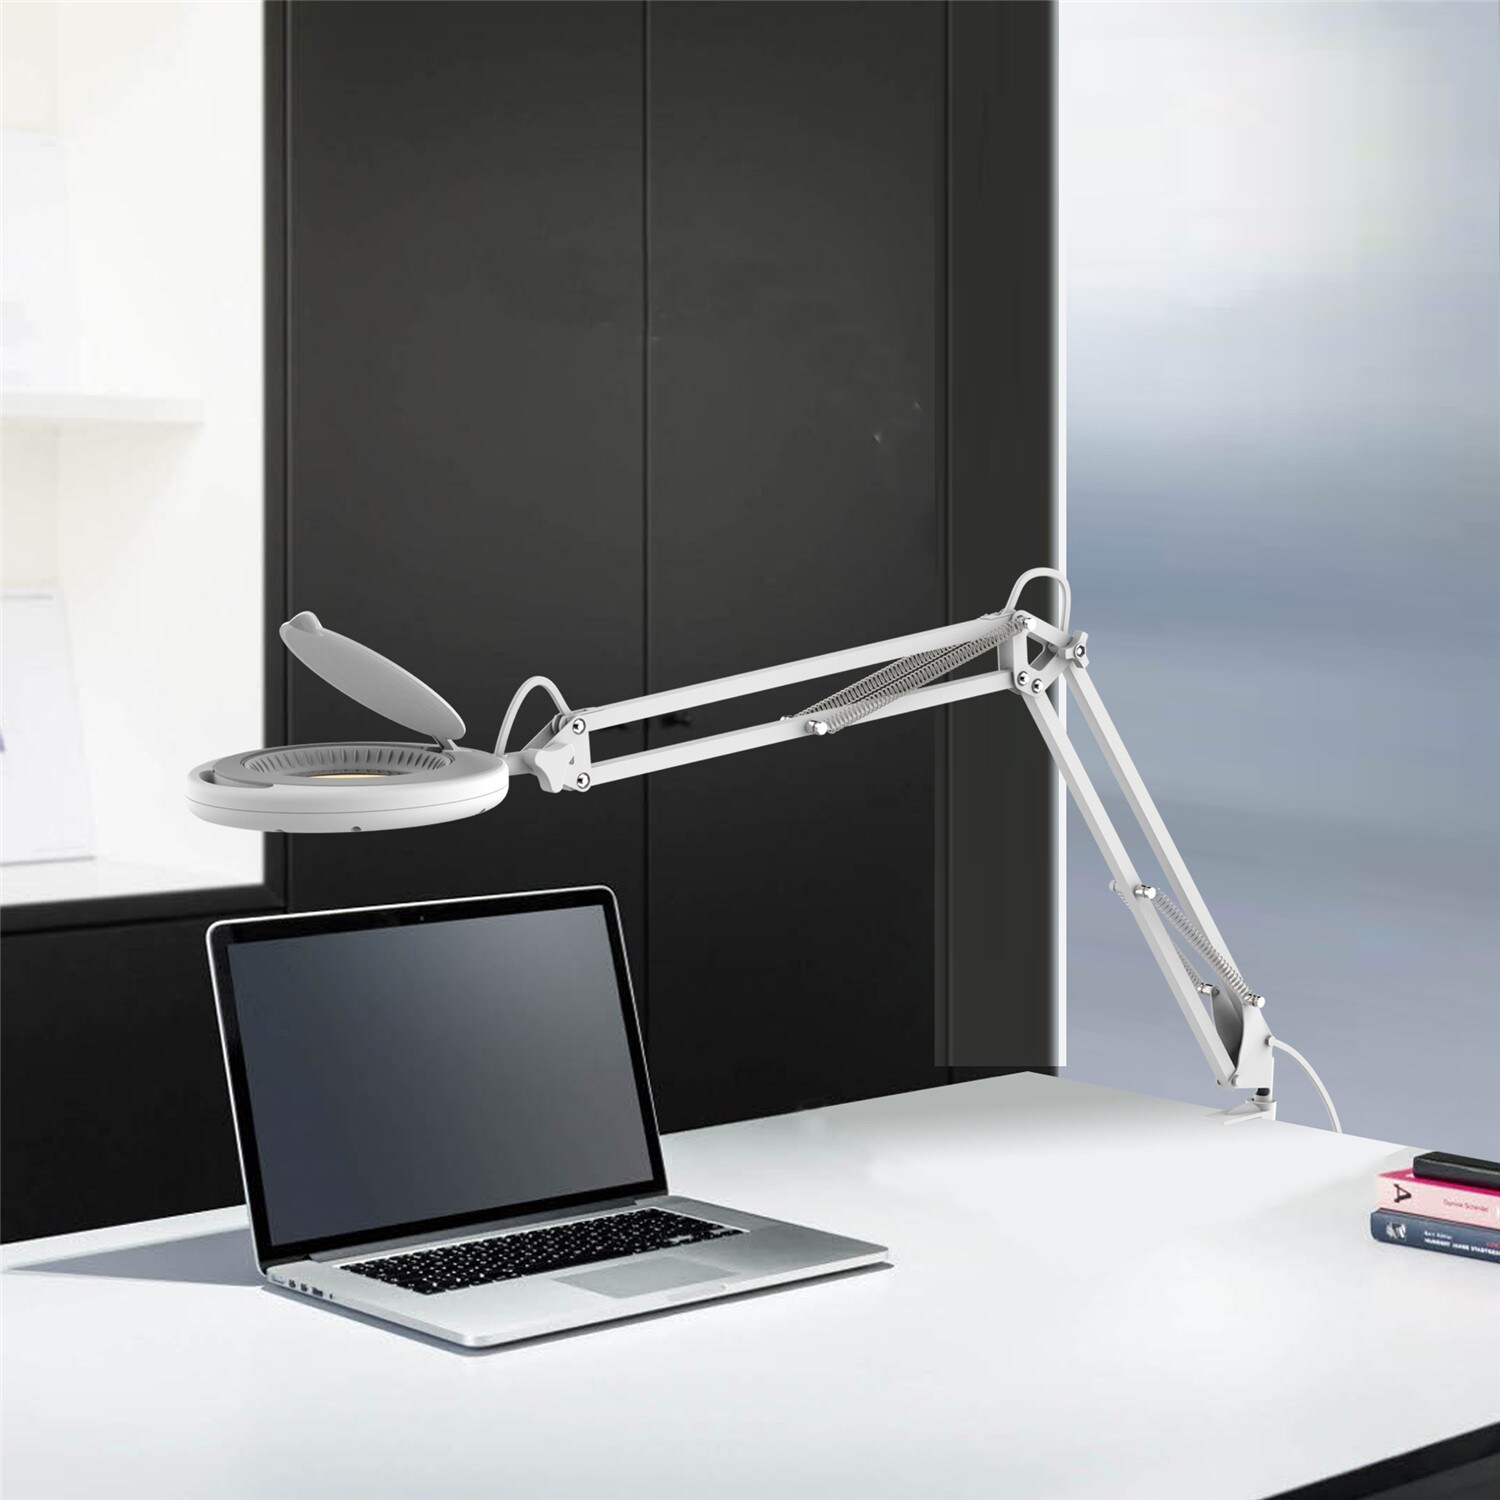 B&S Magnifying Lamp with Adjustable Metal Arm